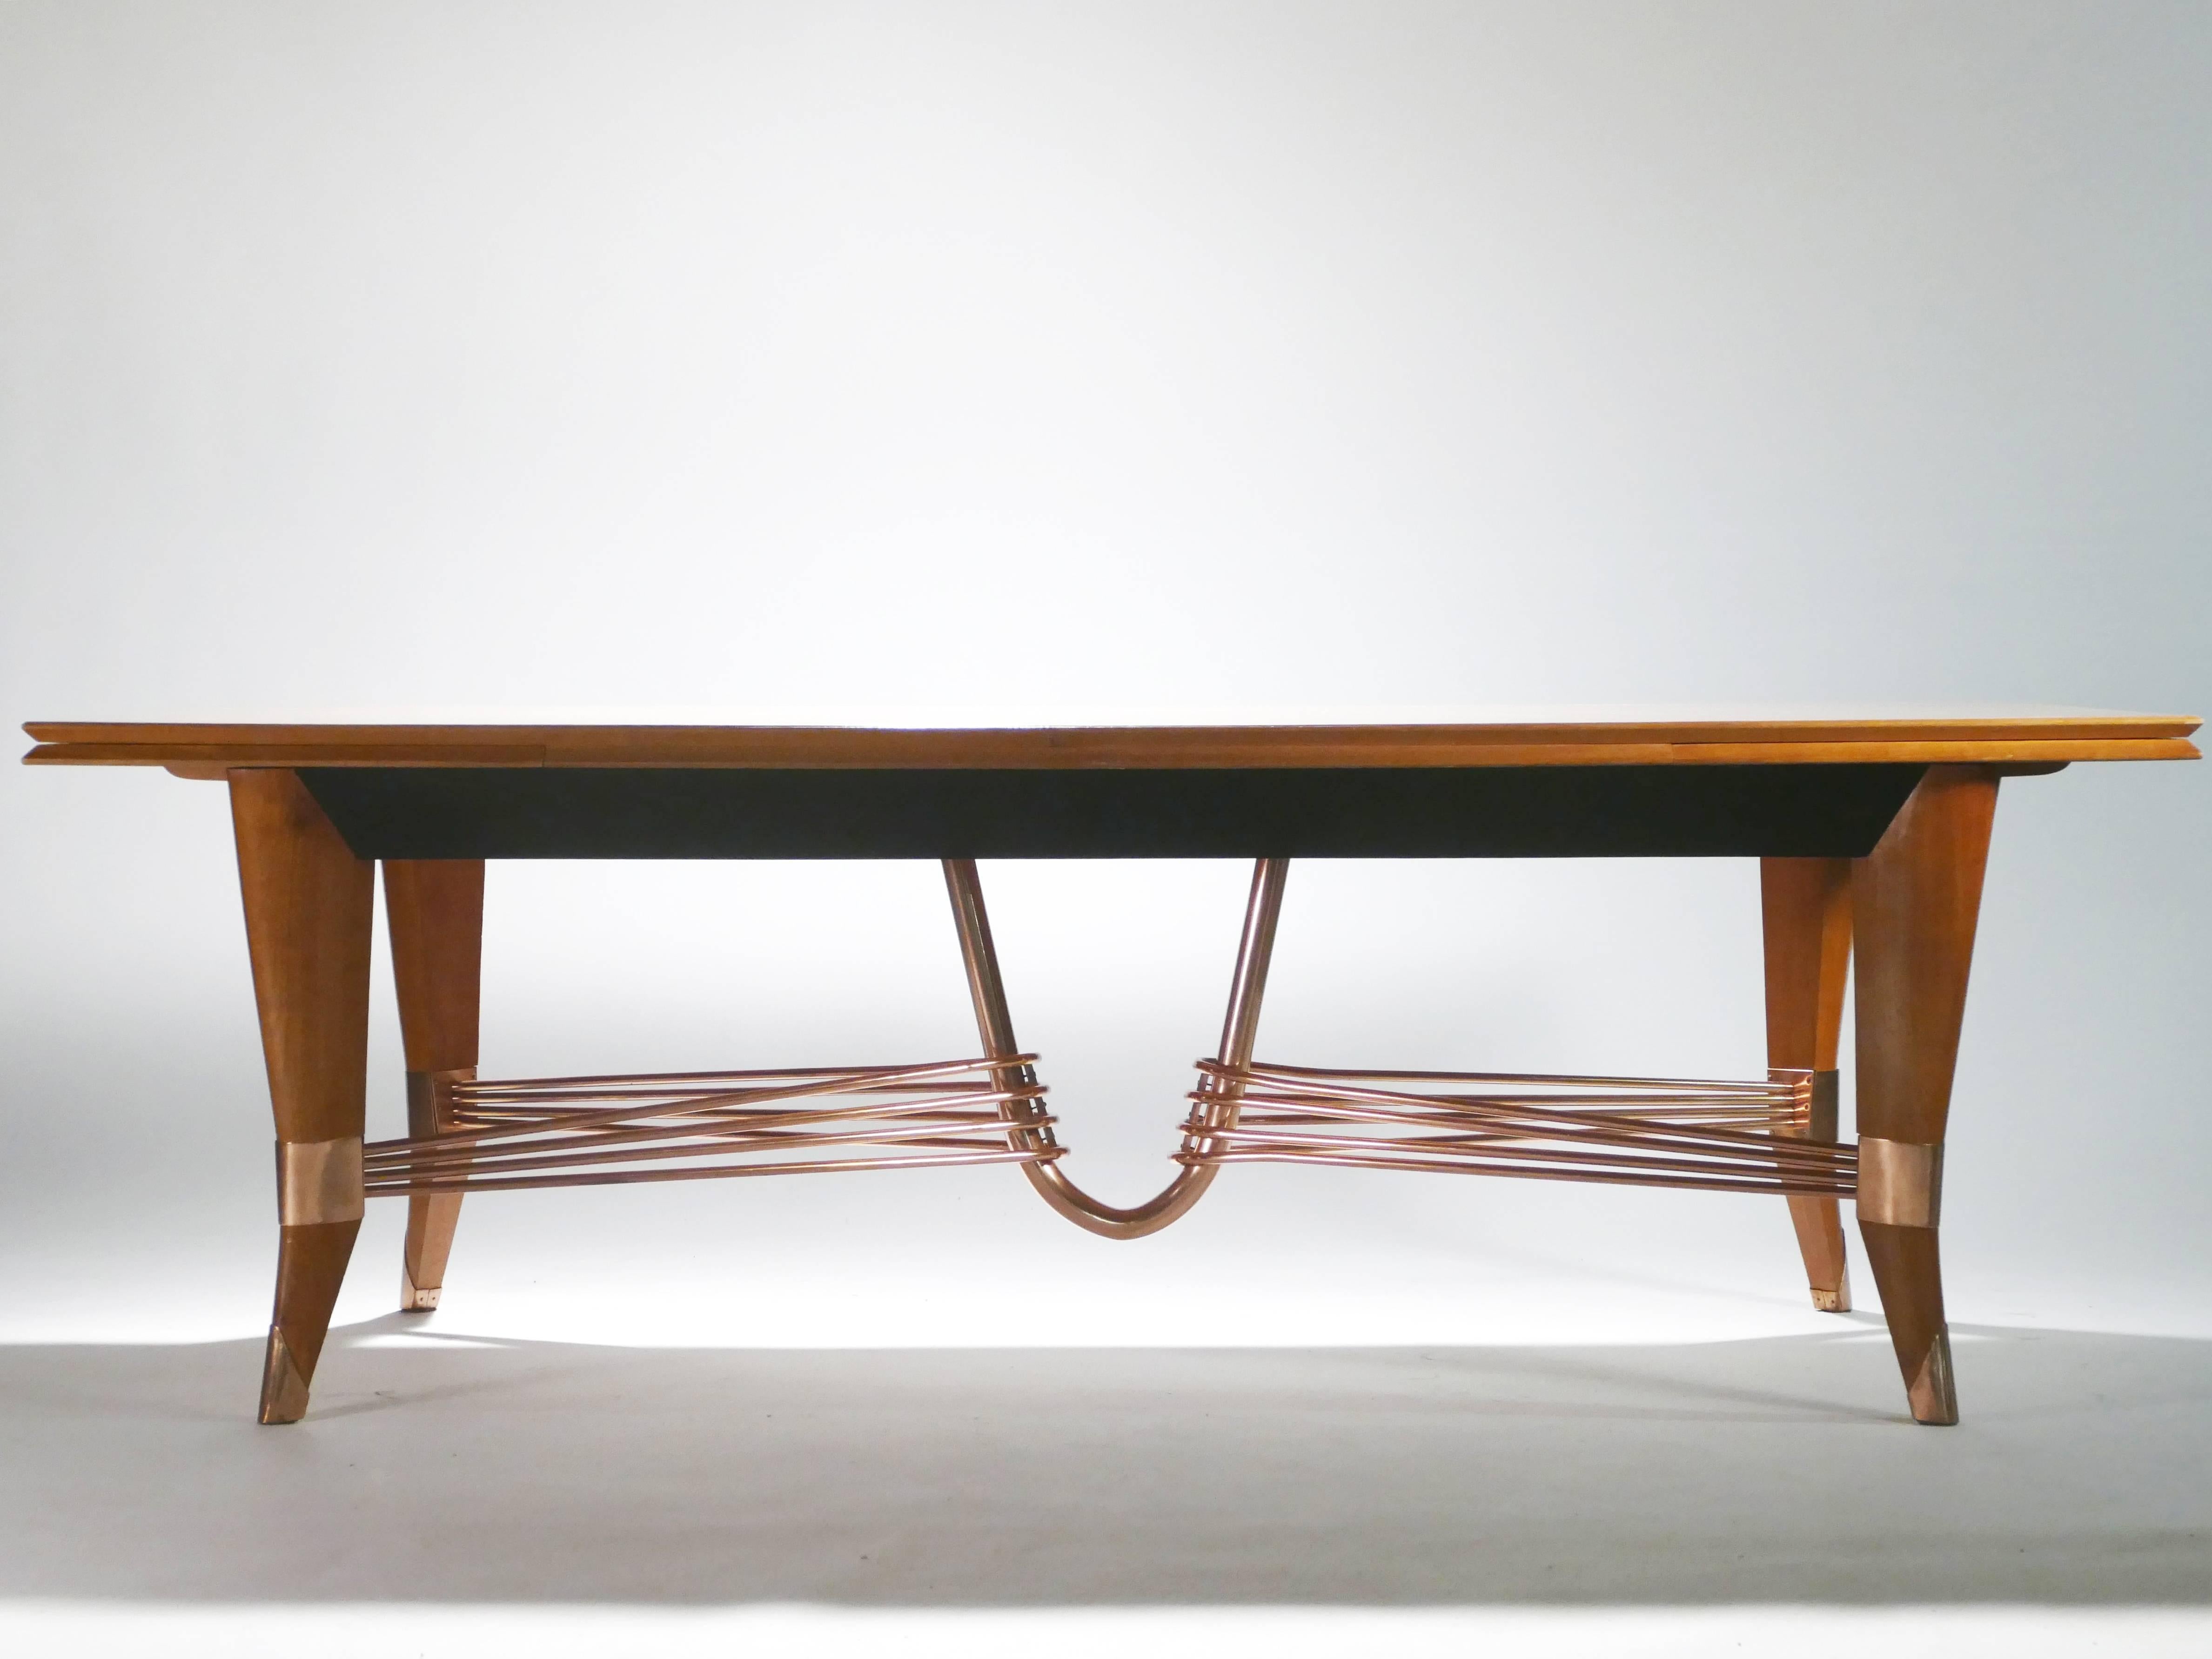 Strong, beautiful copper appears almost elastic as it’s suspended between each foot of this large dining table. The table’s immense, oak-wood varnished top is sleek and warm, providing an ideal, functional surface, while the inventive copper